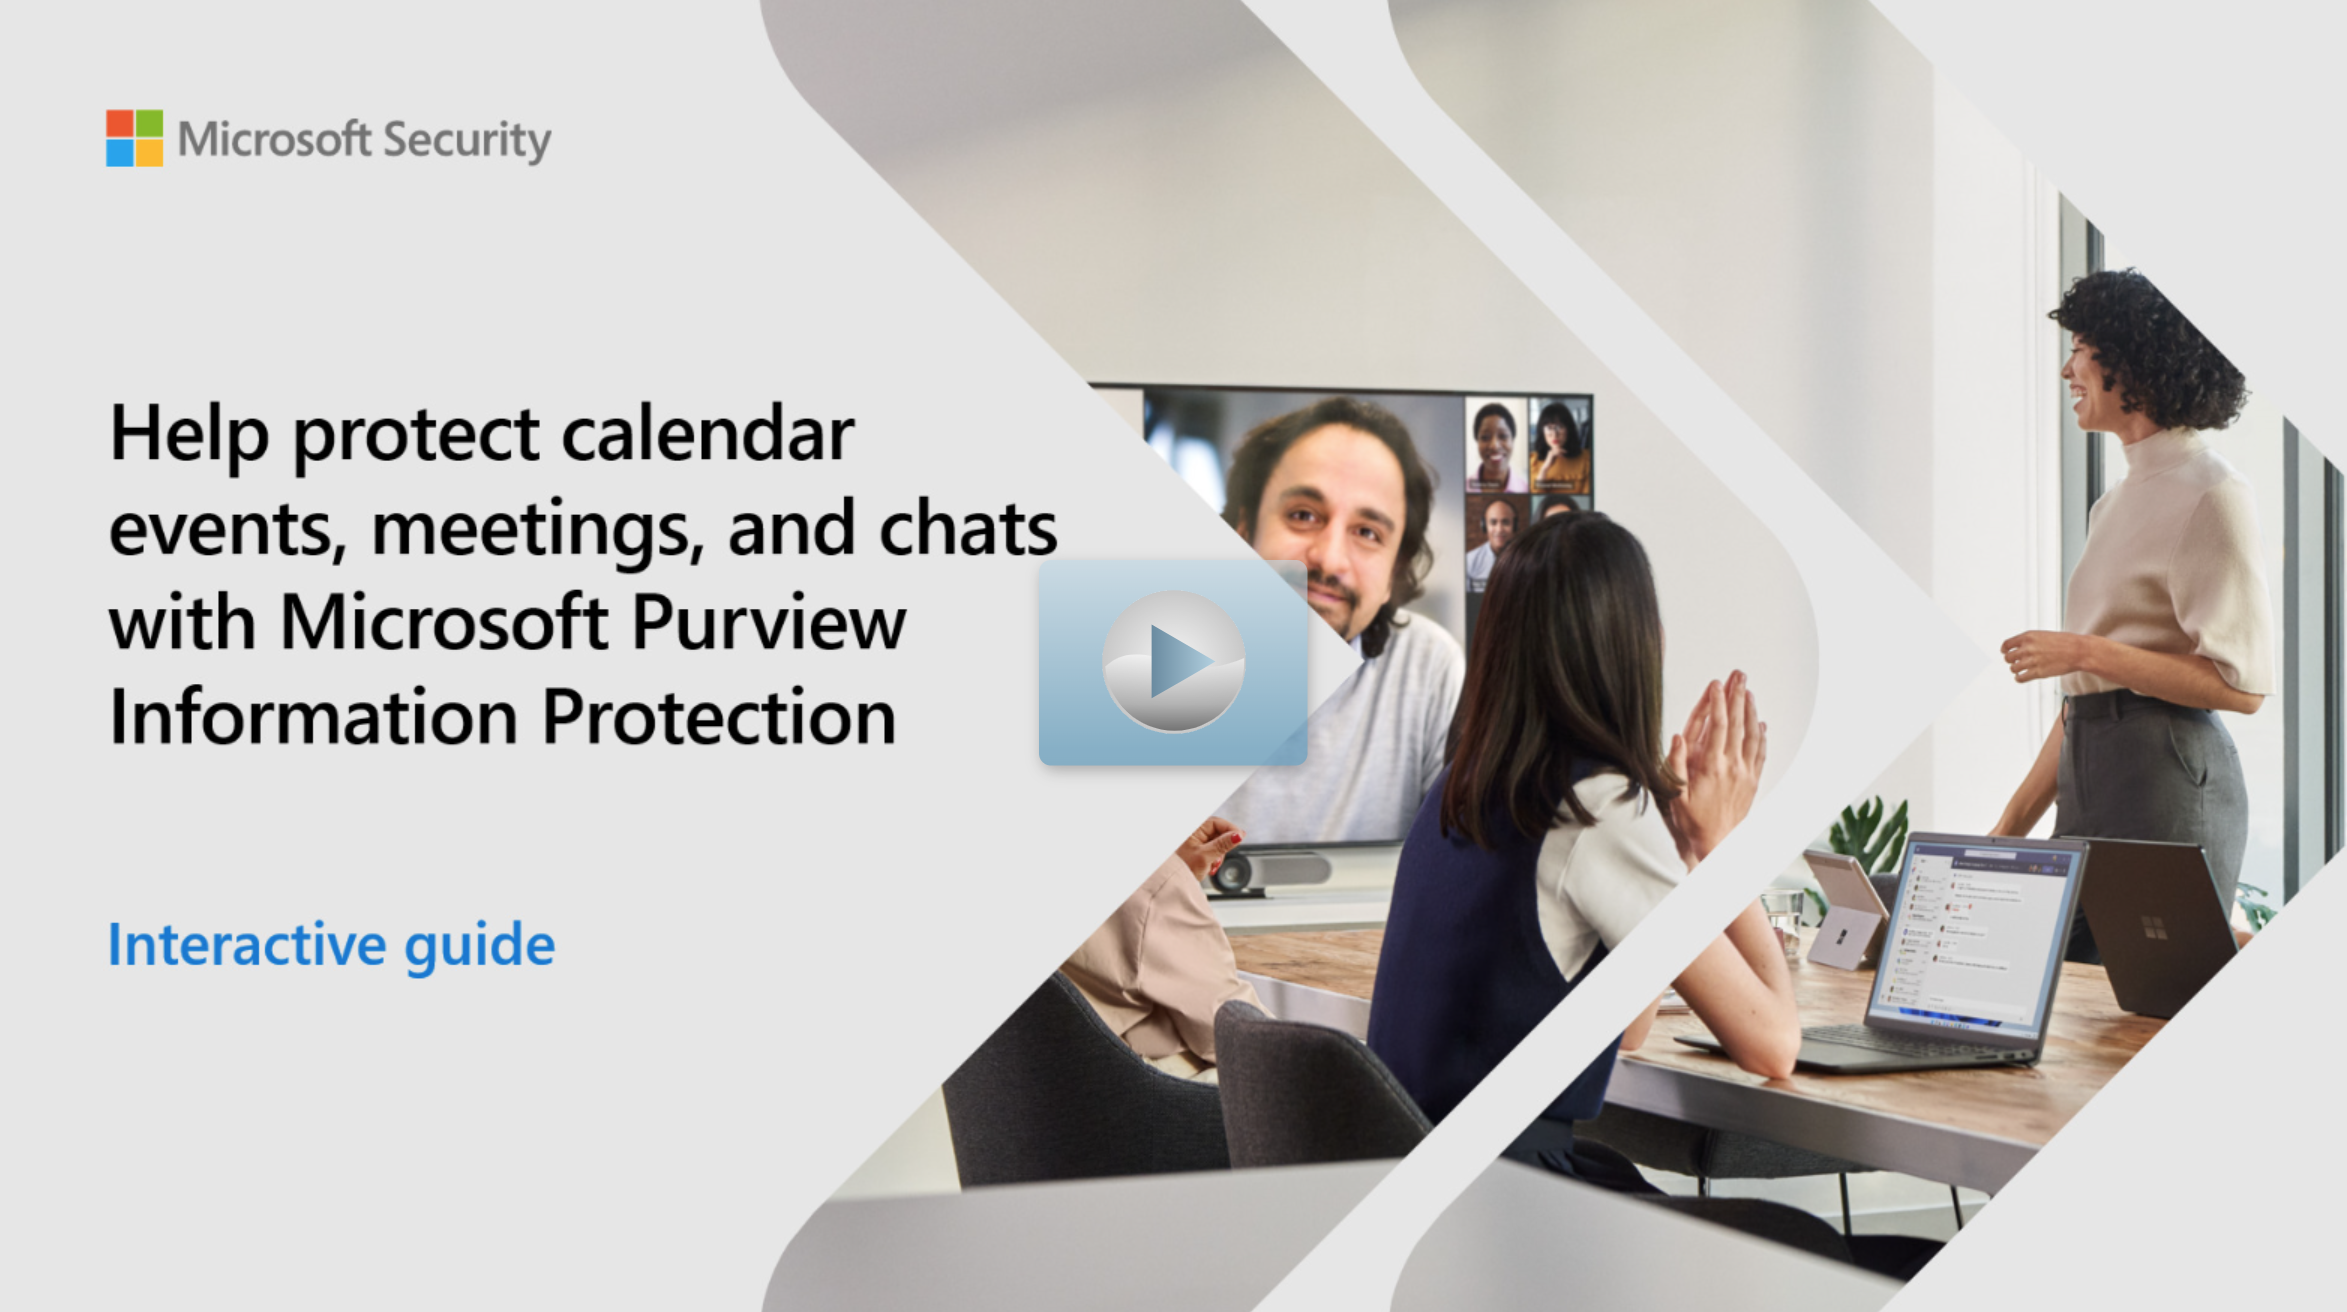 Cover illustration for an interactive guide that says Help protect calender events, meetings, and chats with Microsoft Purview Information Protection interactive guide.